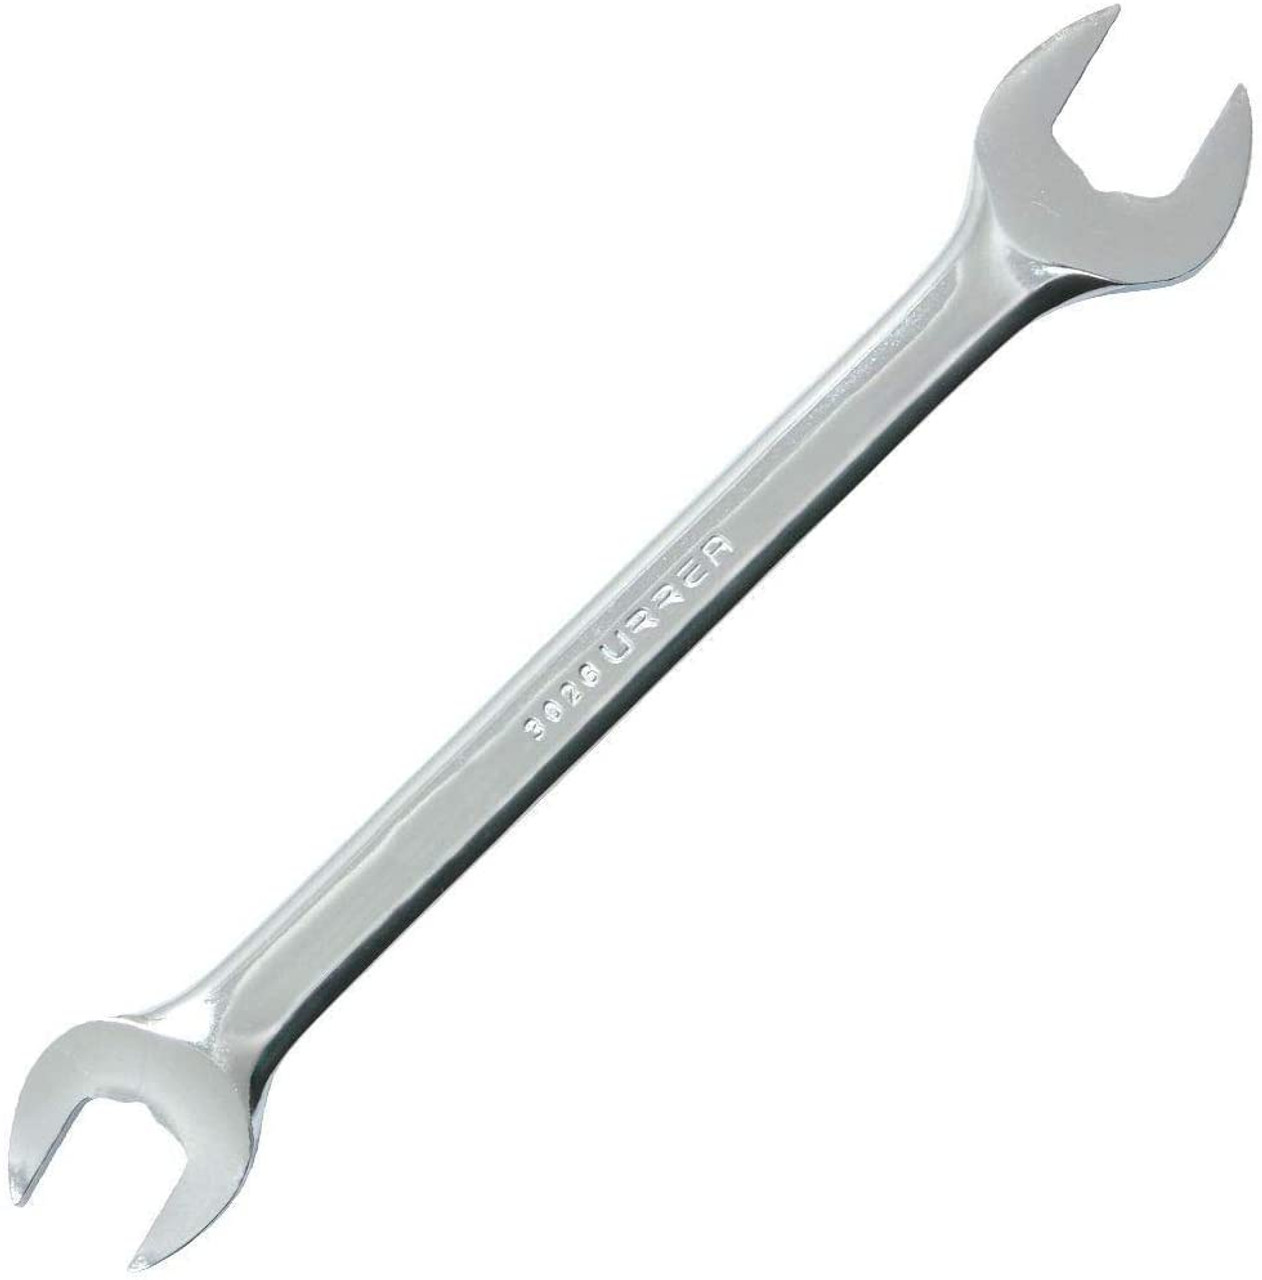 Full polished  Open-End wrench, Size: 20 x21 mm, Total Length: 9-3/4"